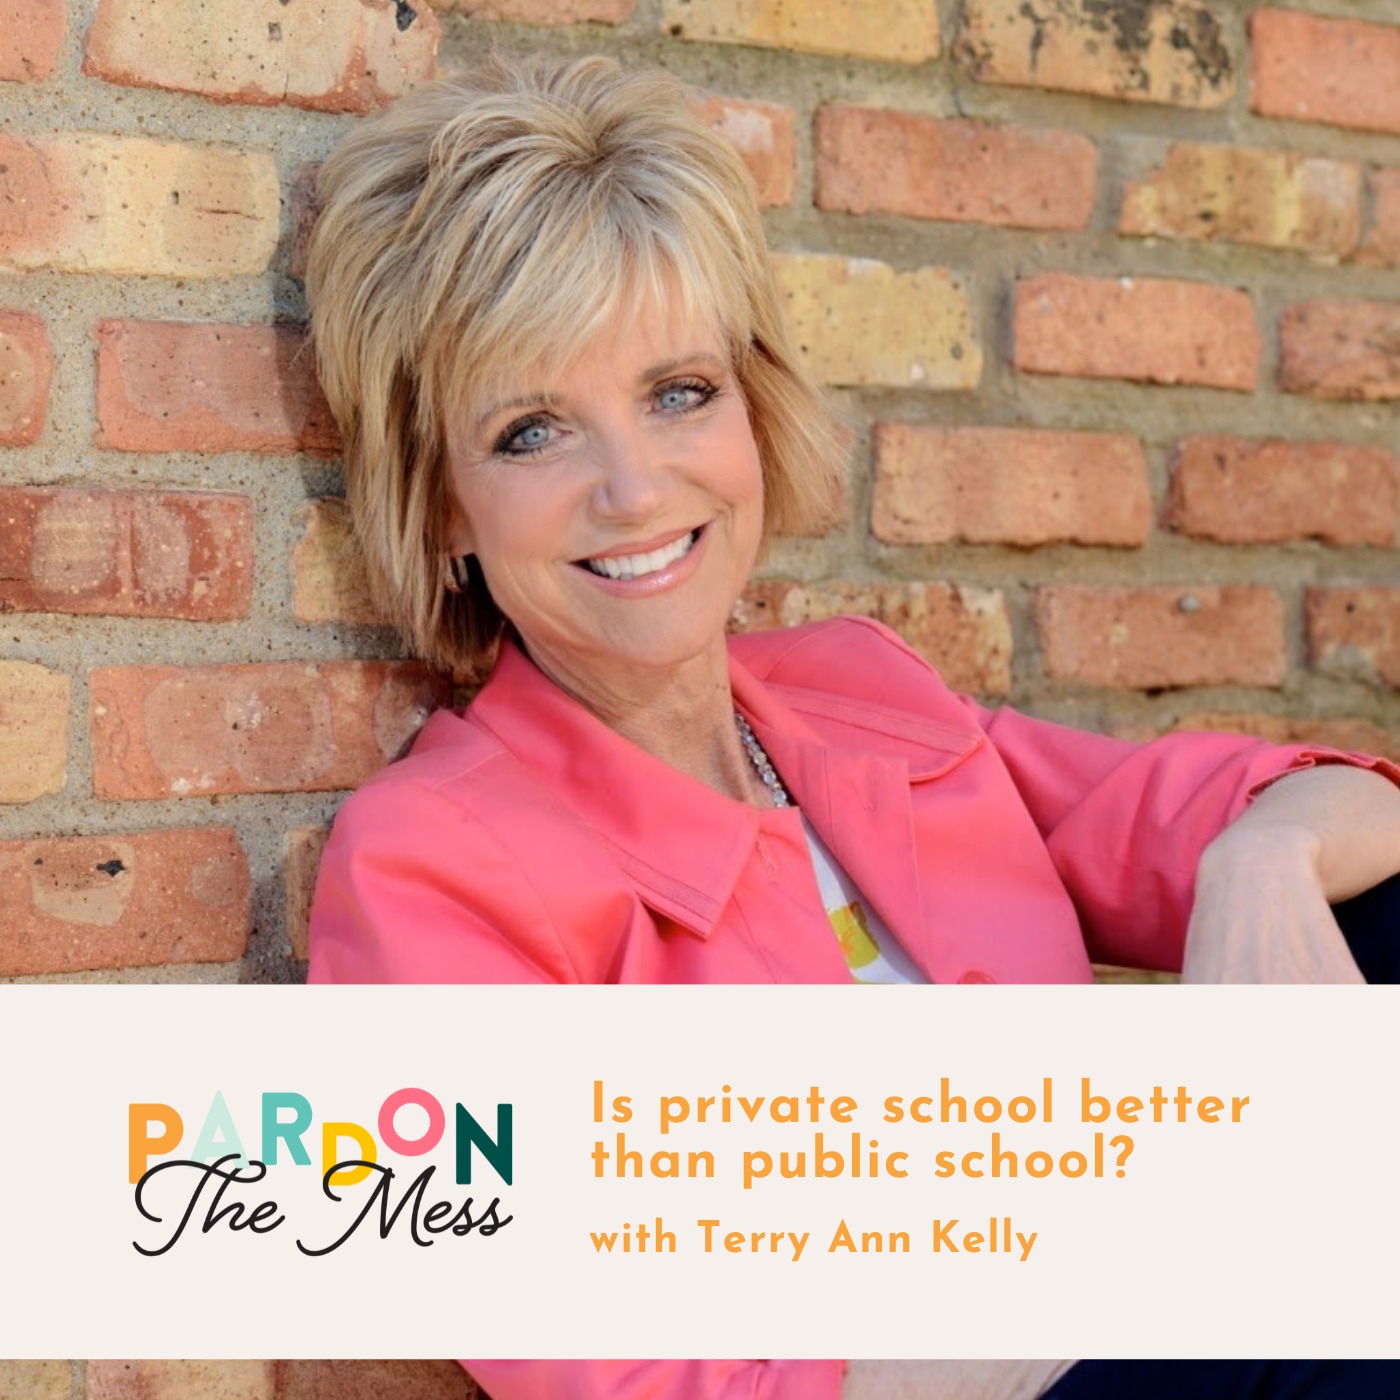 Is private school better than public school? With Terry Ann Kelly